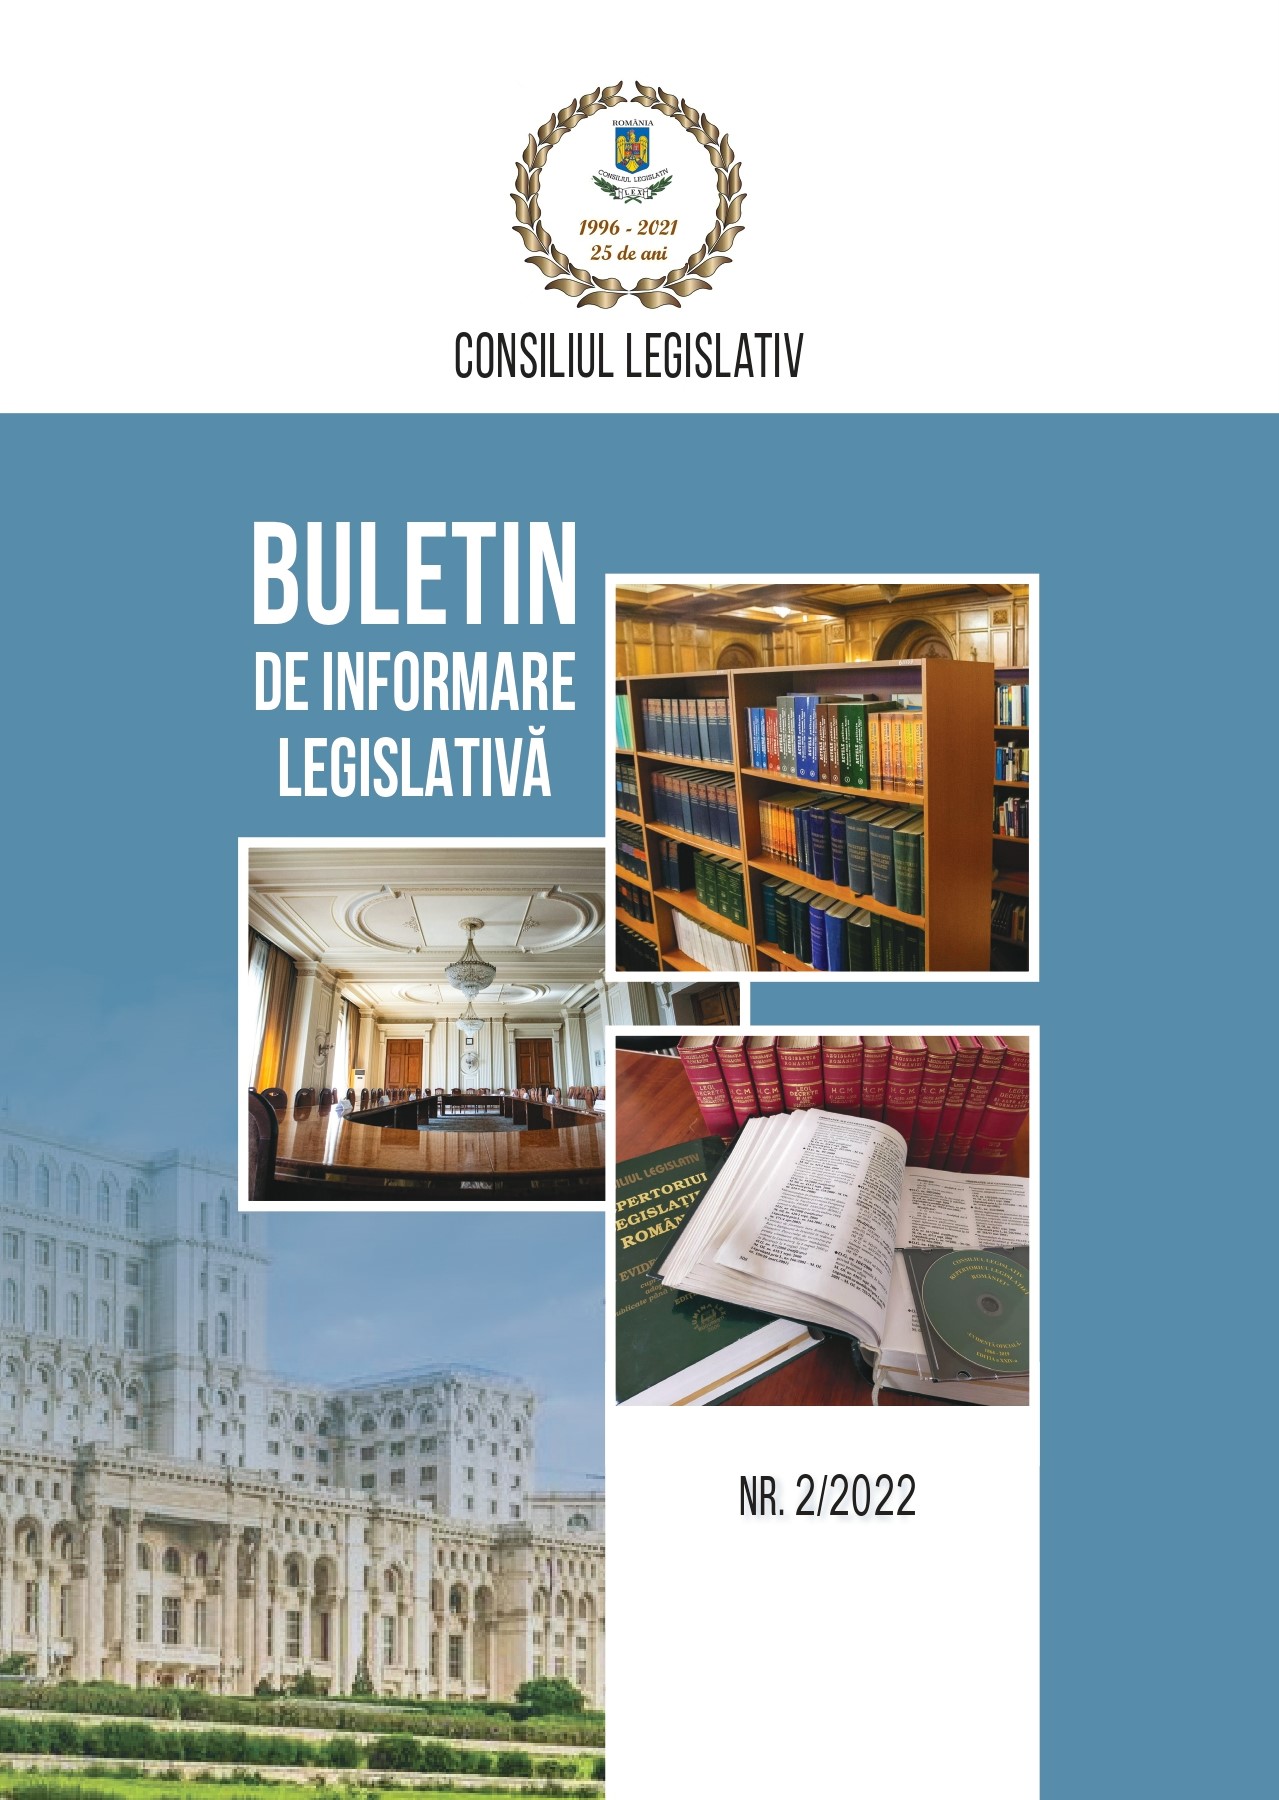 " The Legislative Council - a specialist advisory body 
of the Parliament with a decisive role in ensuring that internal rules are in line with EU regulations" Cover Image